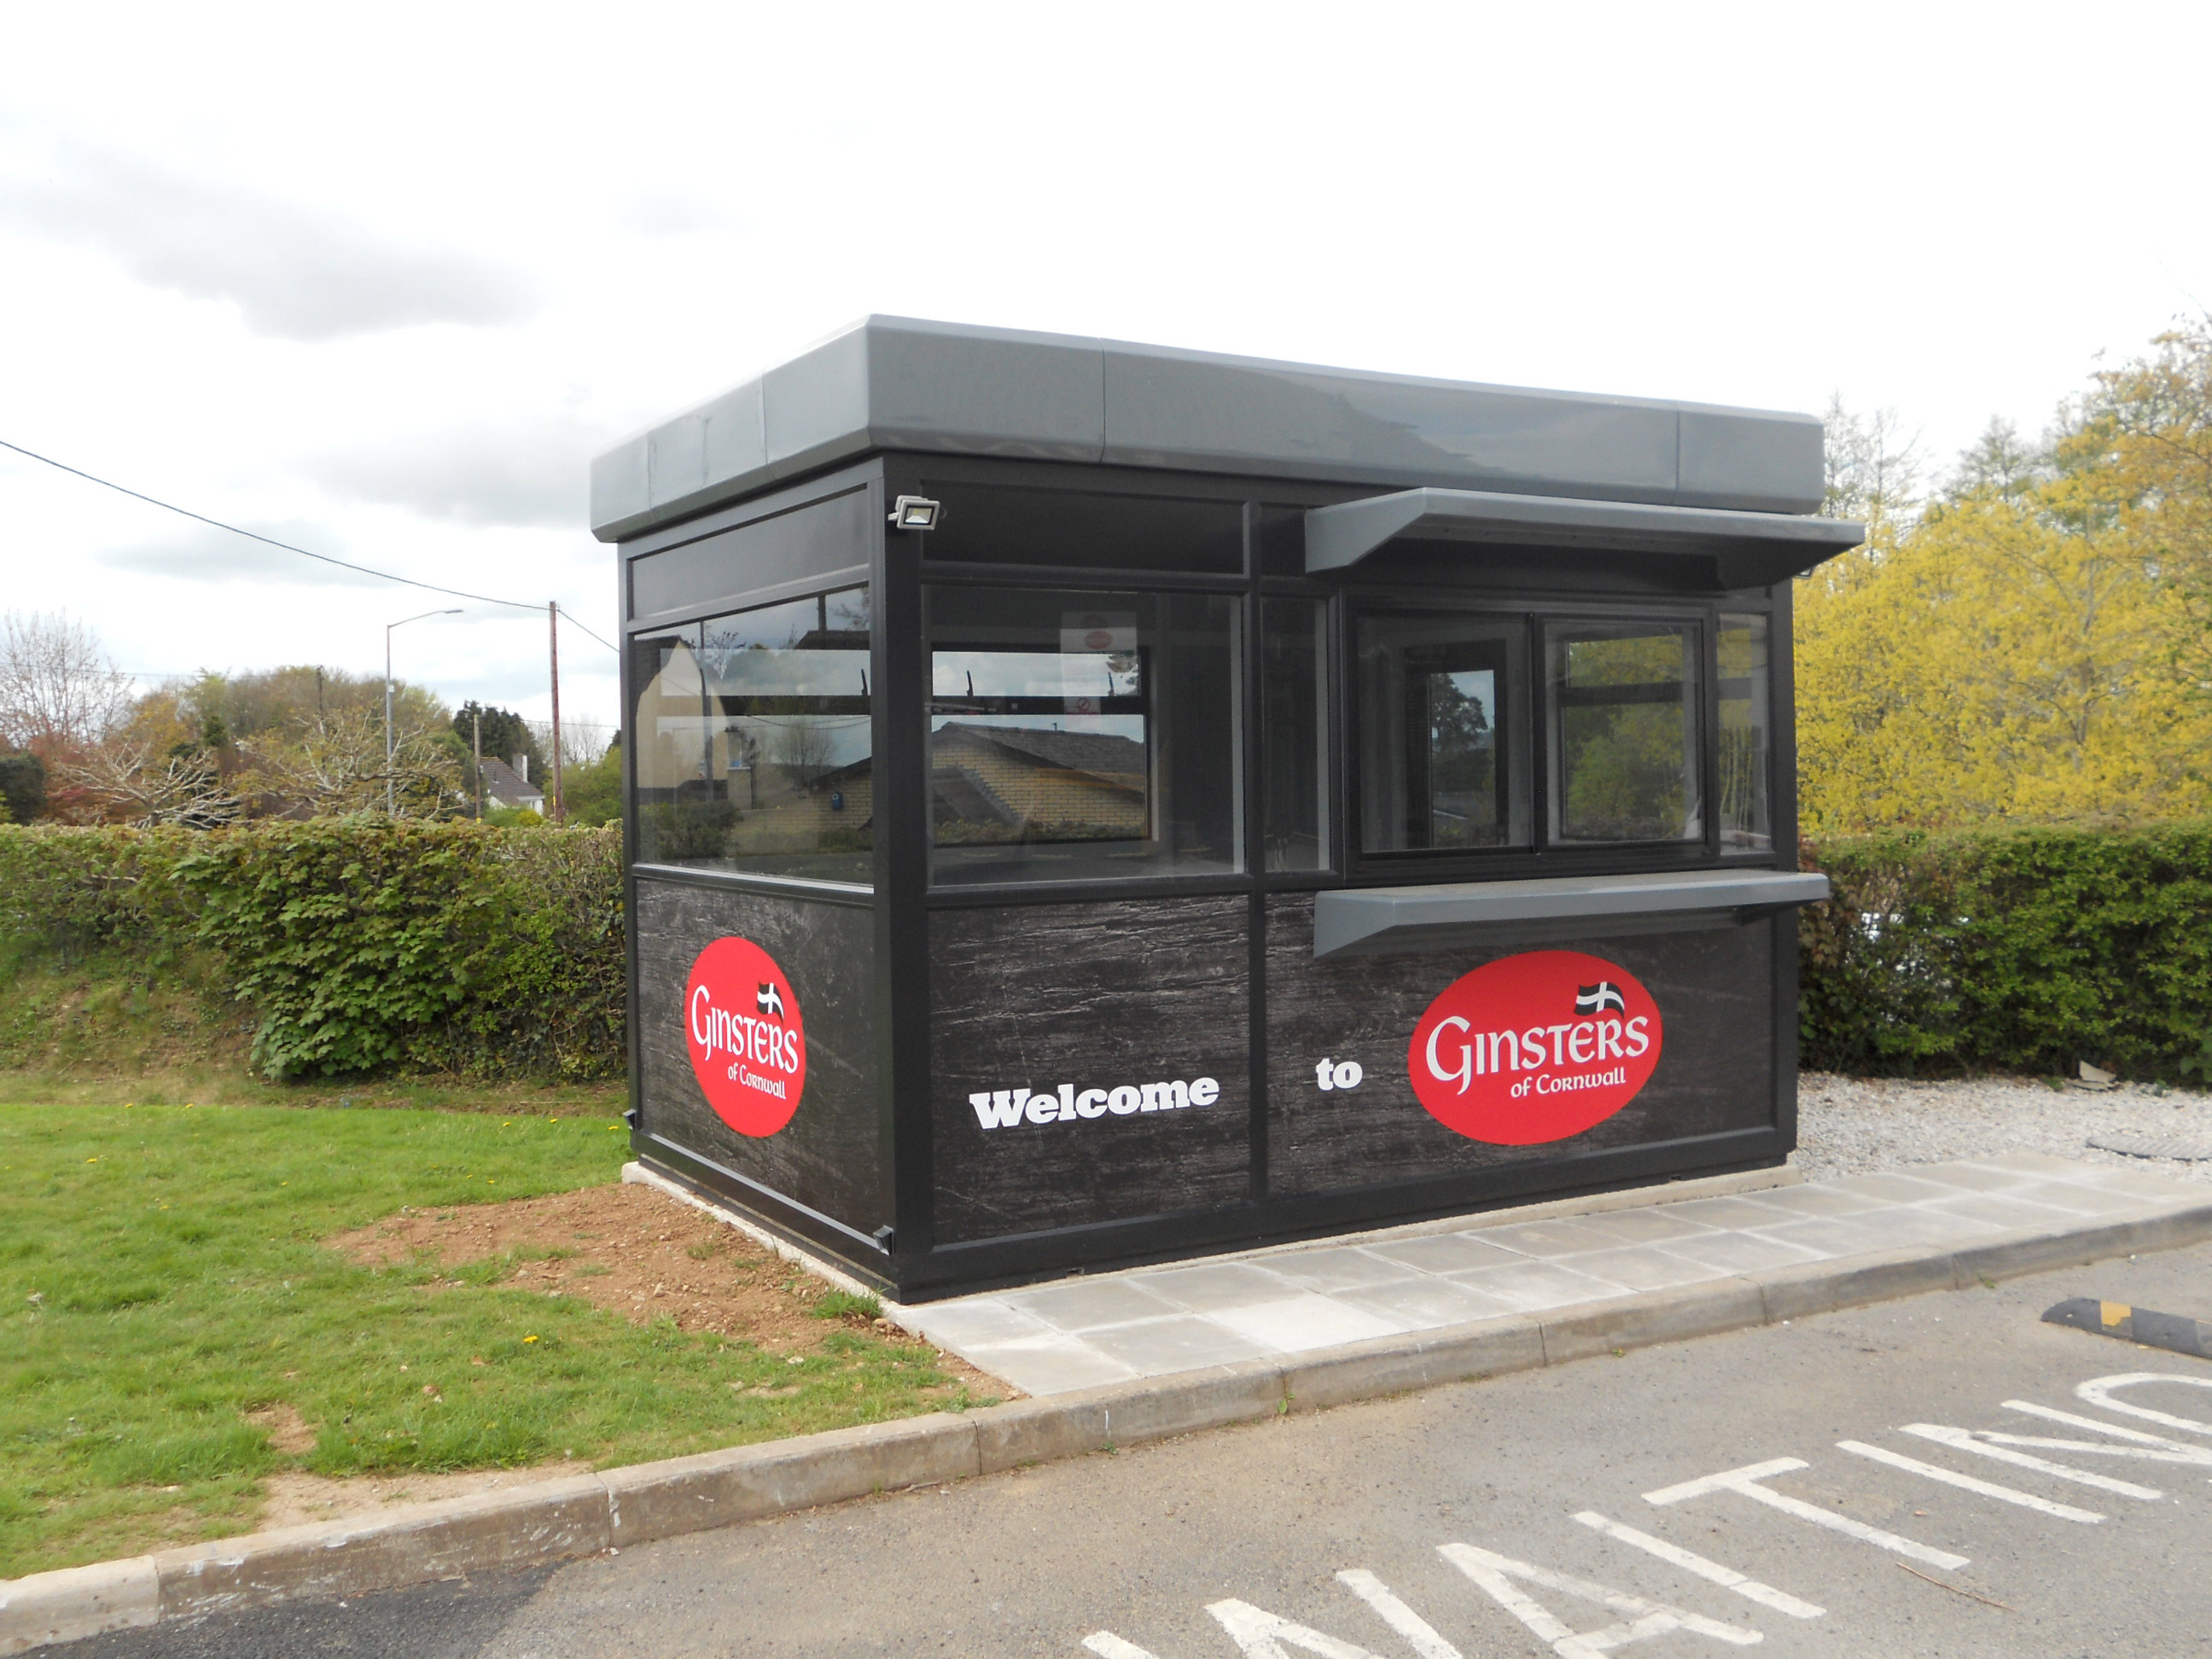 Warrior™ Contemporary Modular Steel Building with front and side graphics